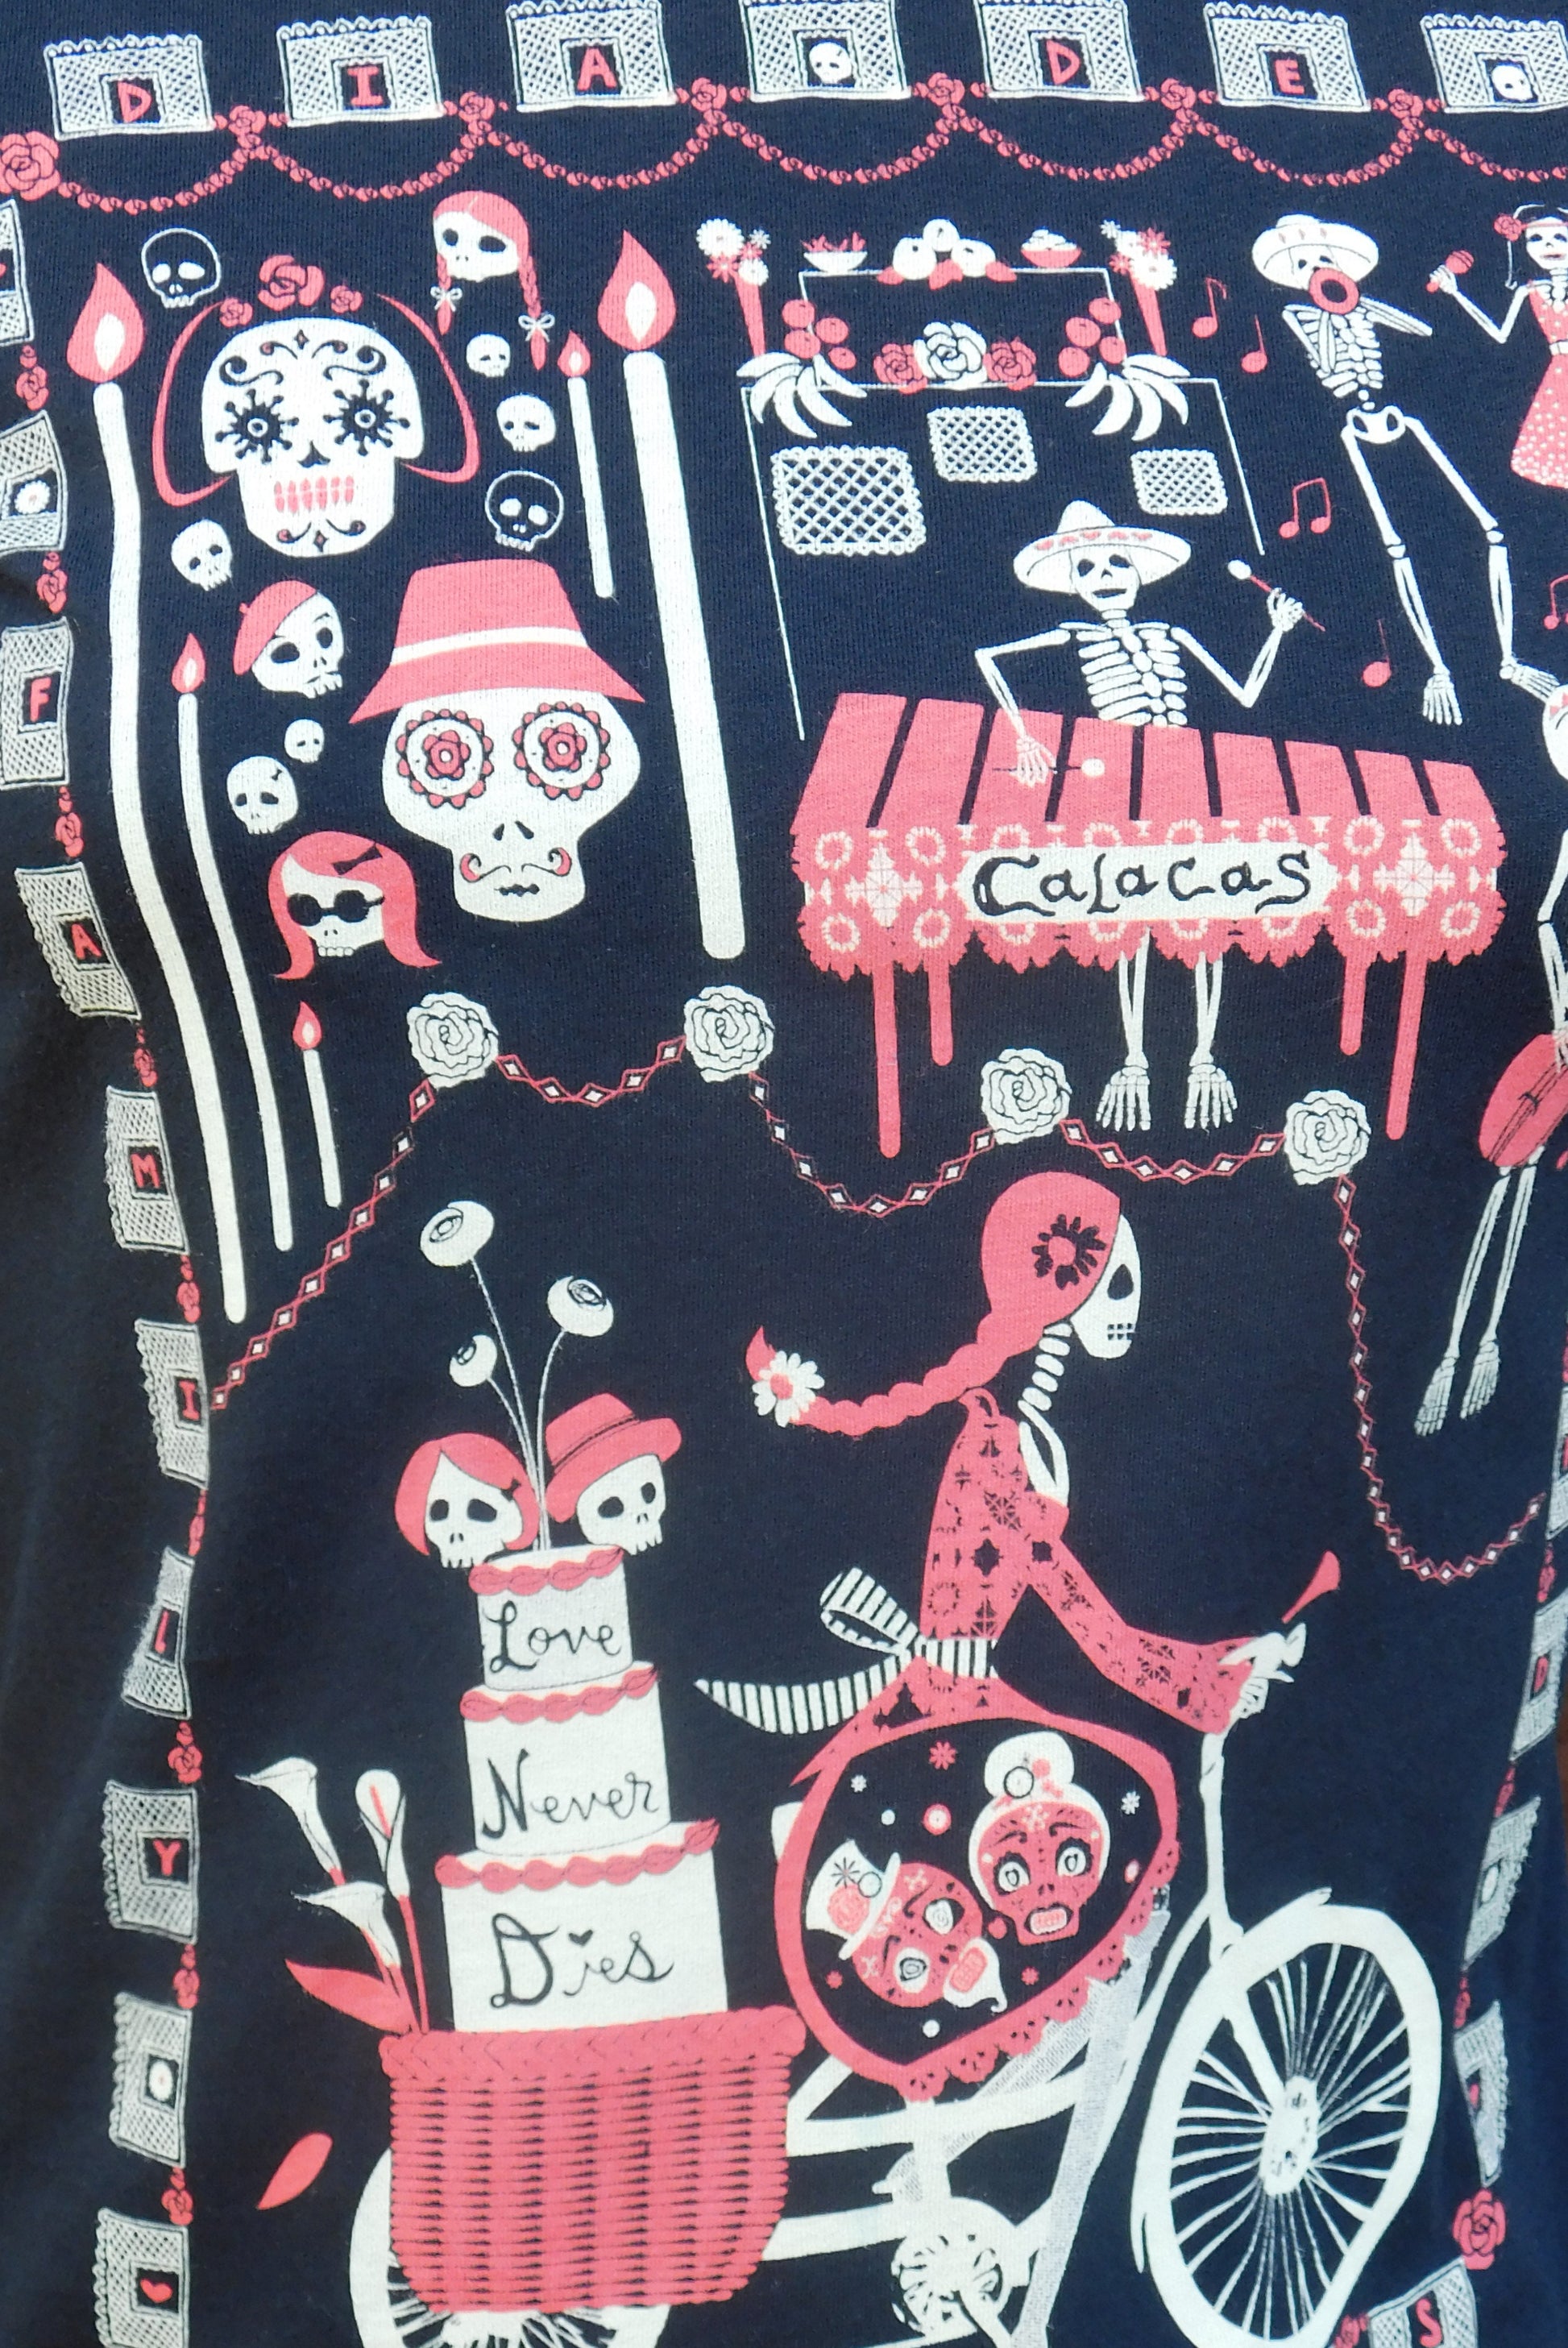 Closeup of fabric featuring graphic of skeletons celebrating and riding bikes